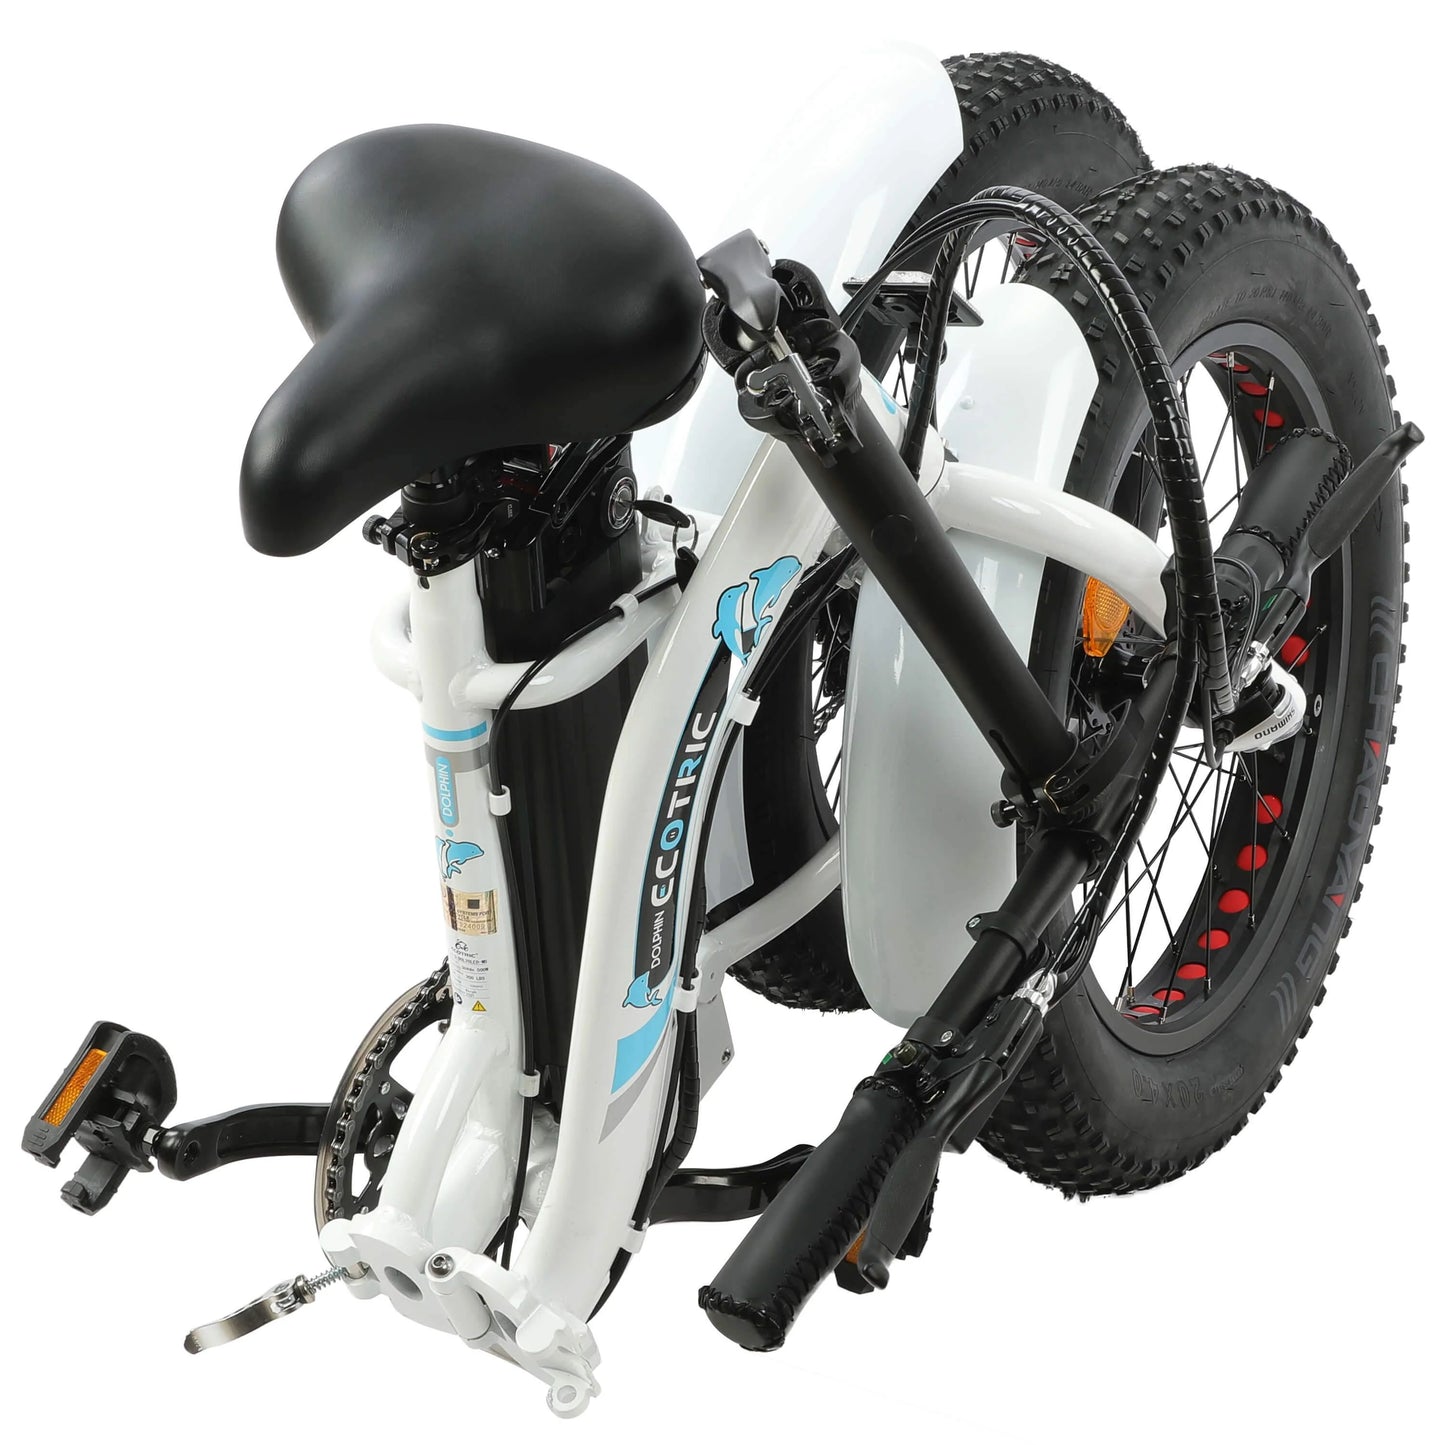 UL Certified-Ecotric 20inch portable and folding fat bike model Dolphin, Top Speed: 25 MPH